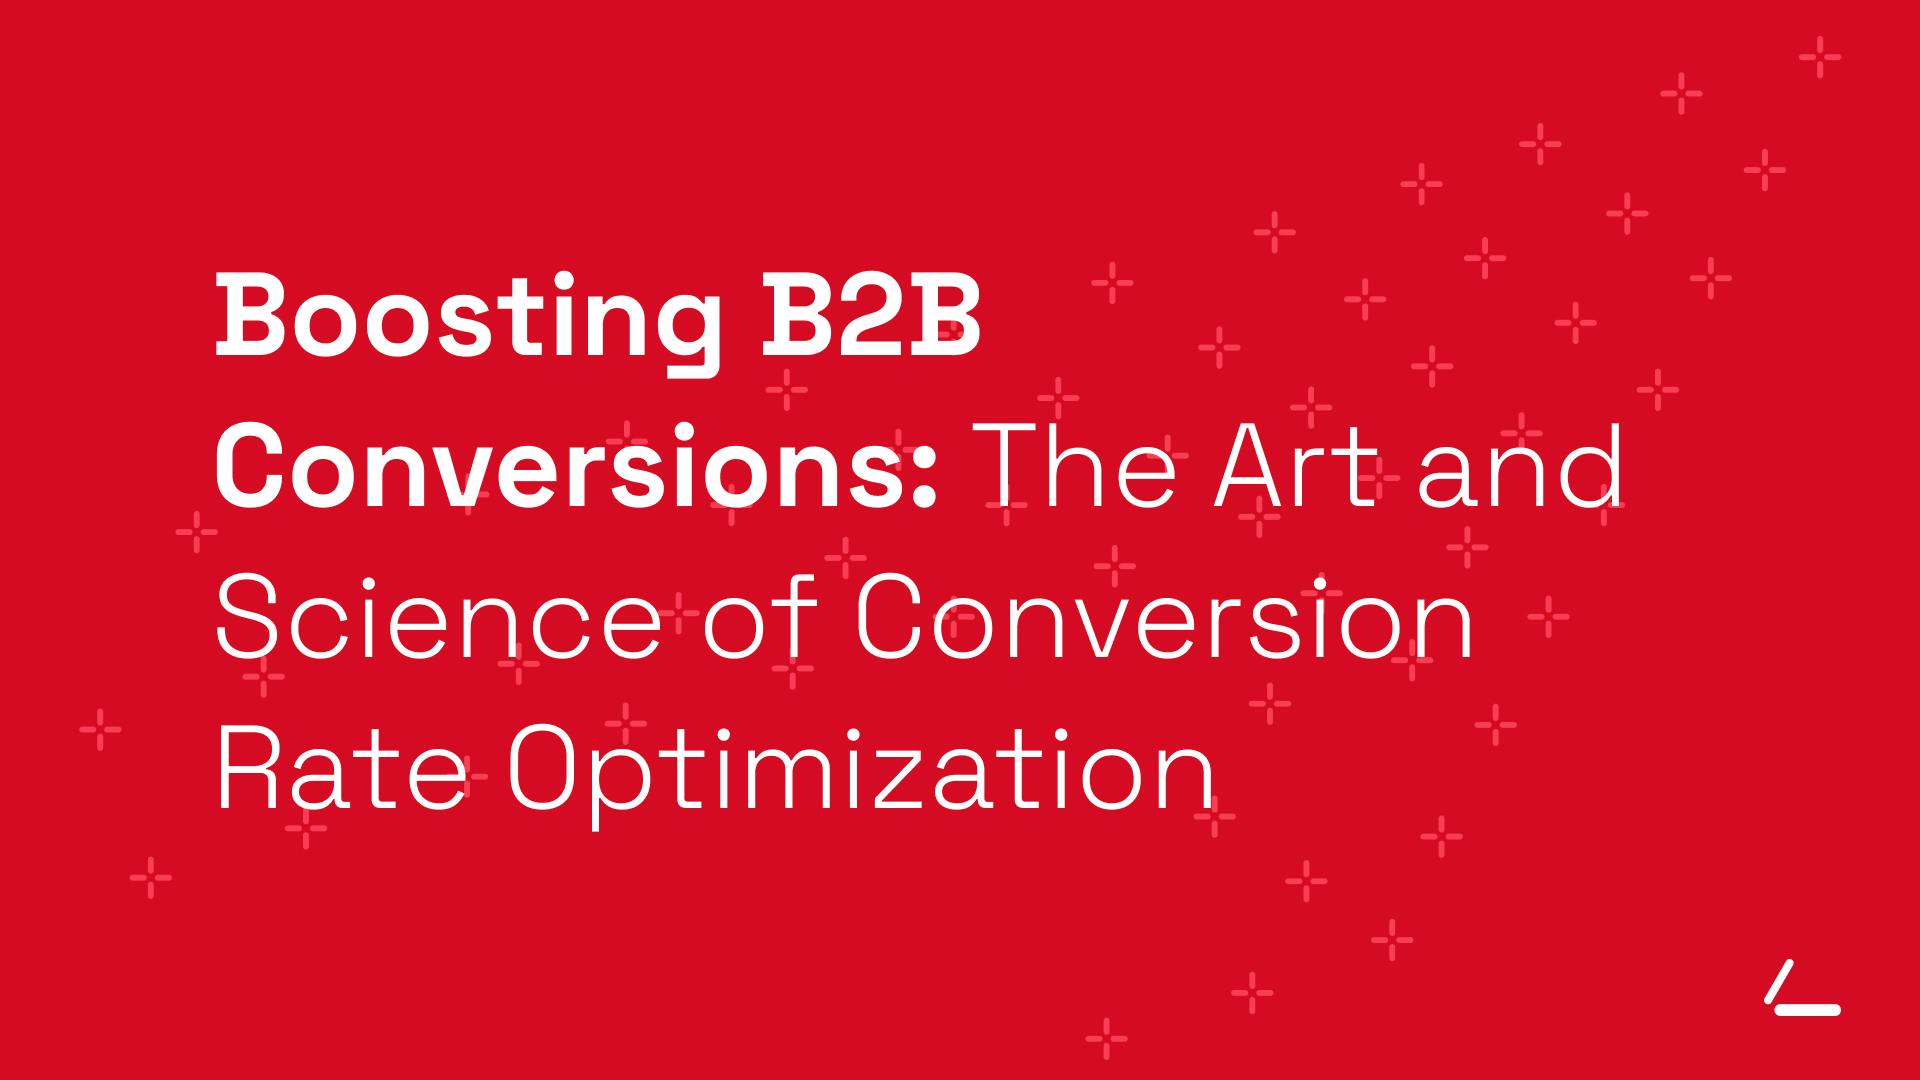 SEO Article Header - Red background with text about Conversion Rate Optimization